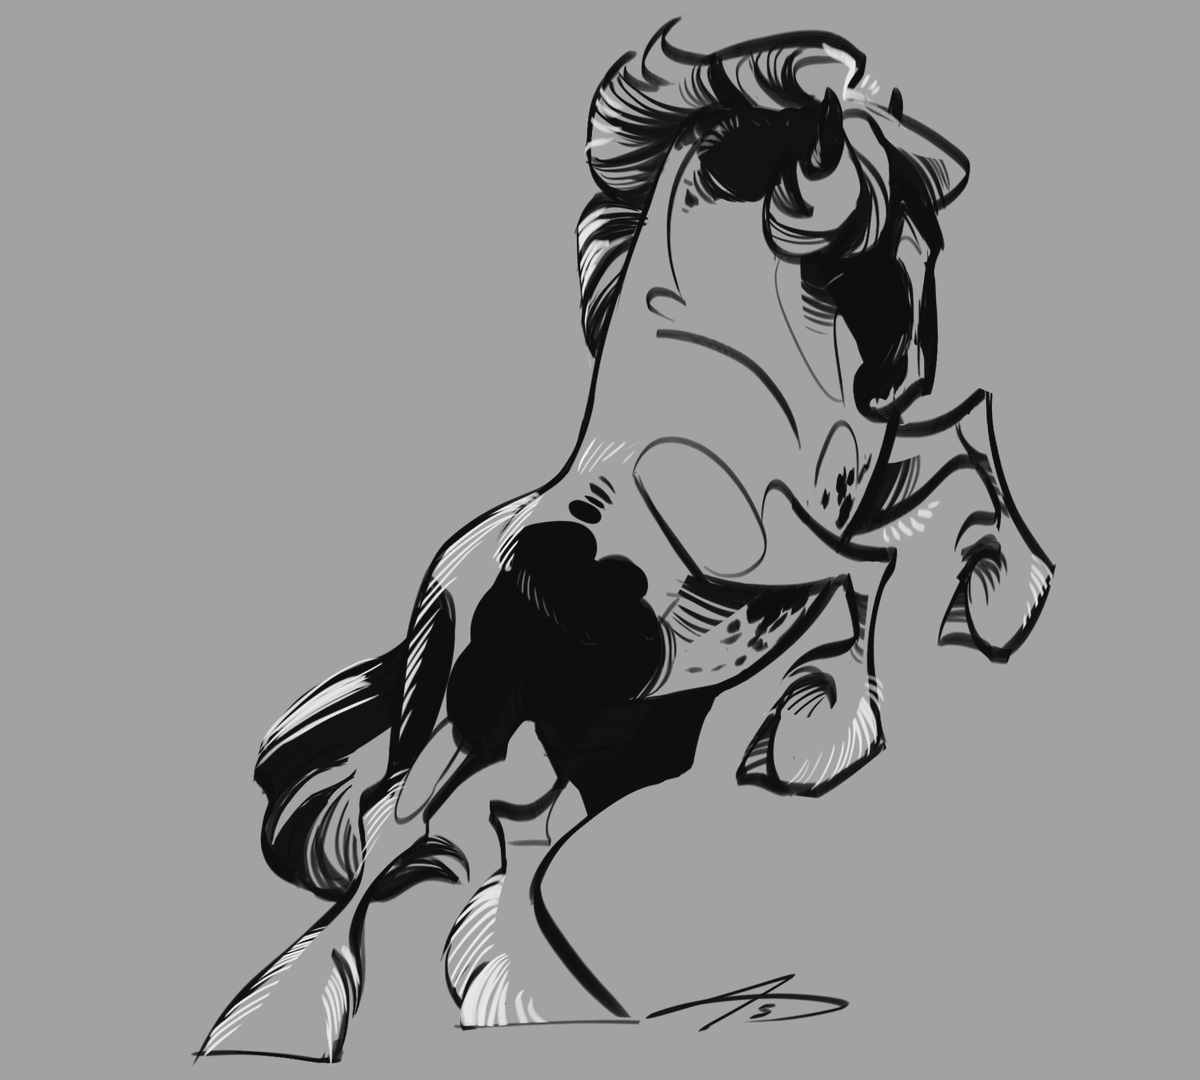 Messed around a bit today, I didn't have a plan so I just did whatever came to mind
#horseart #horsedrawing #drafthorse #rearinghorse